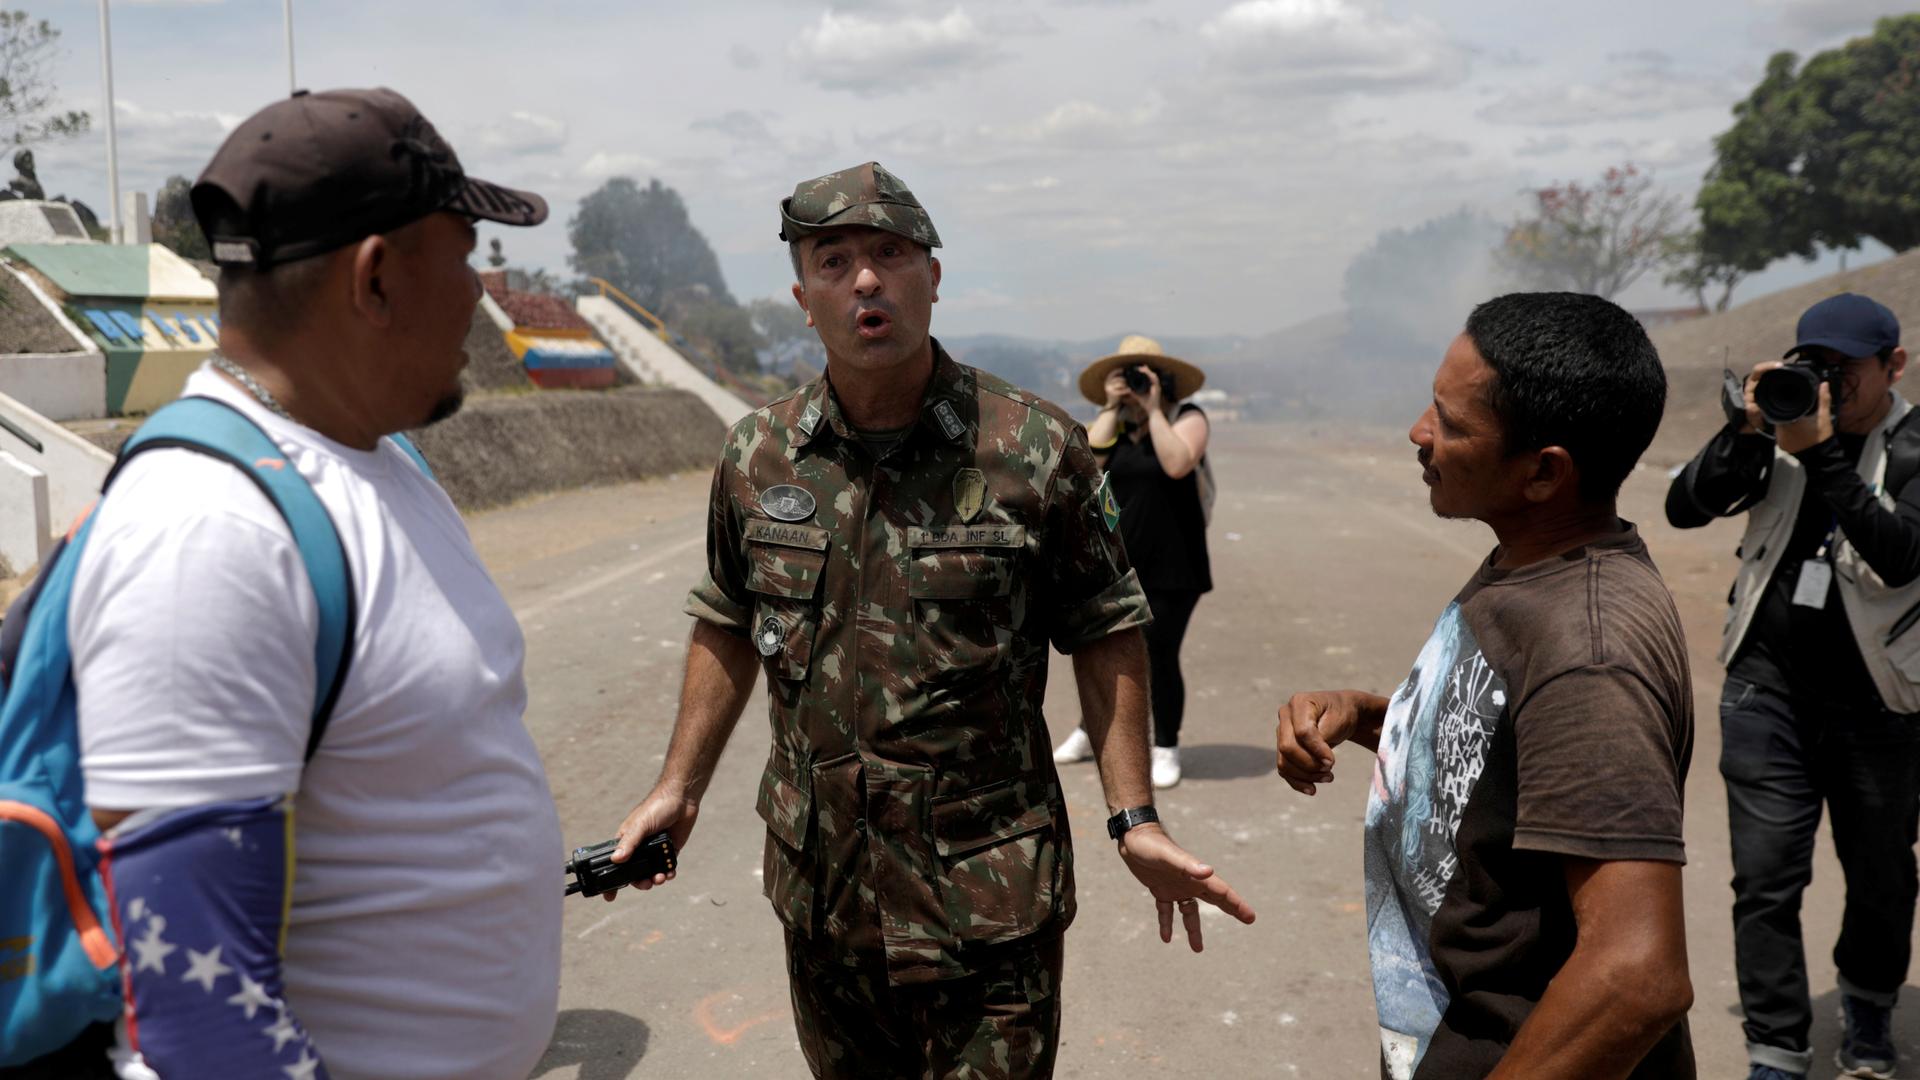 Man in uniform stands between two civilians with gesture of calm.